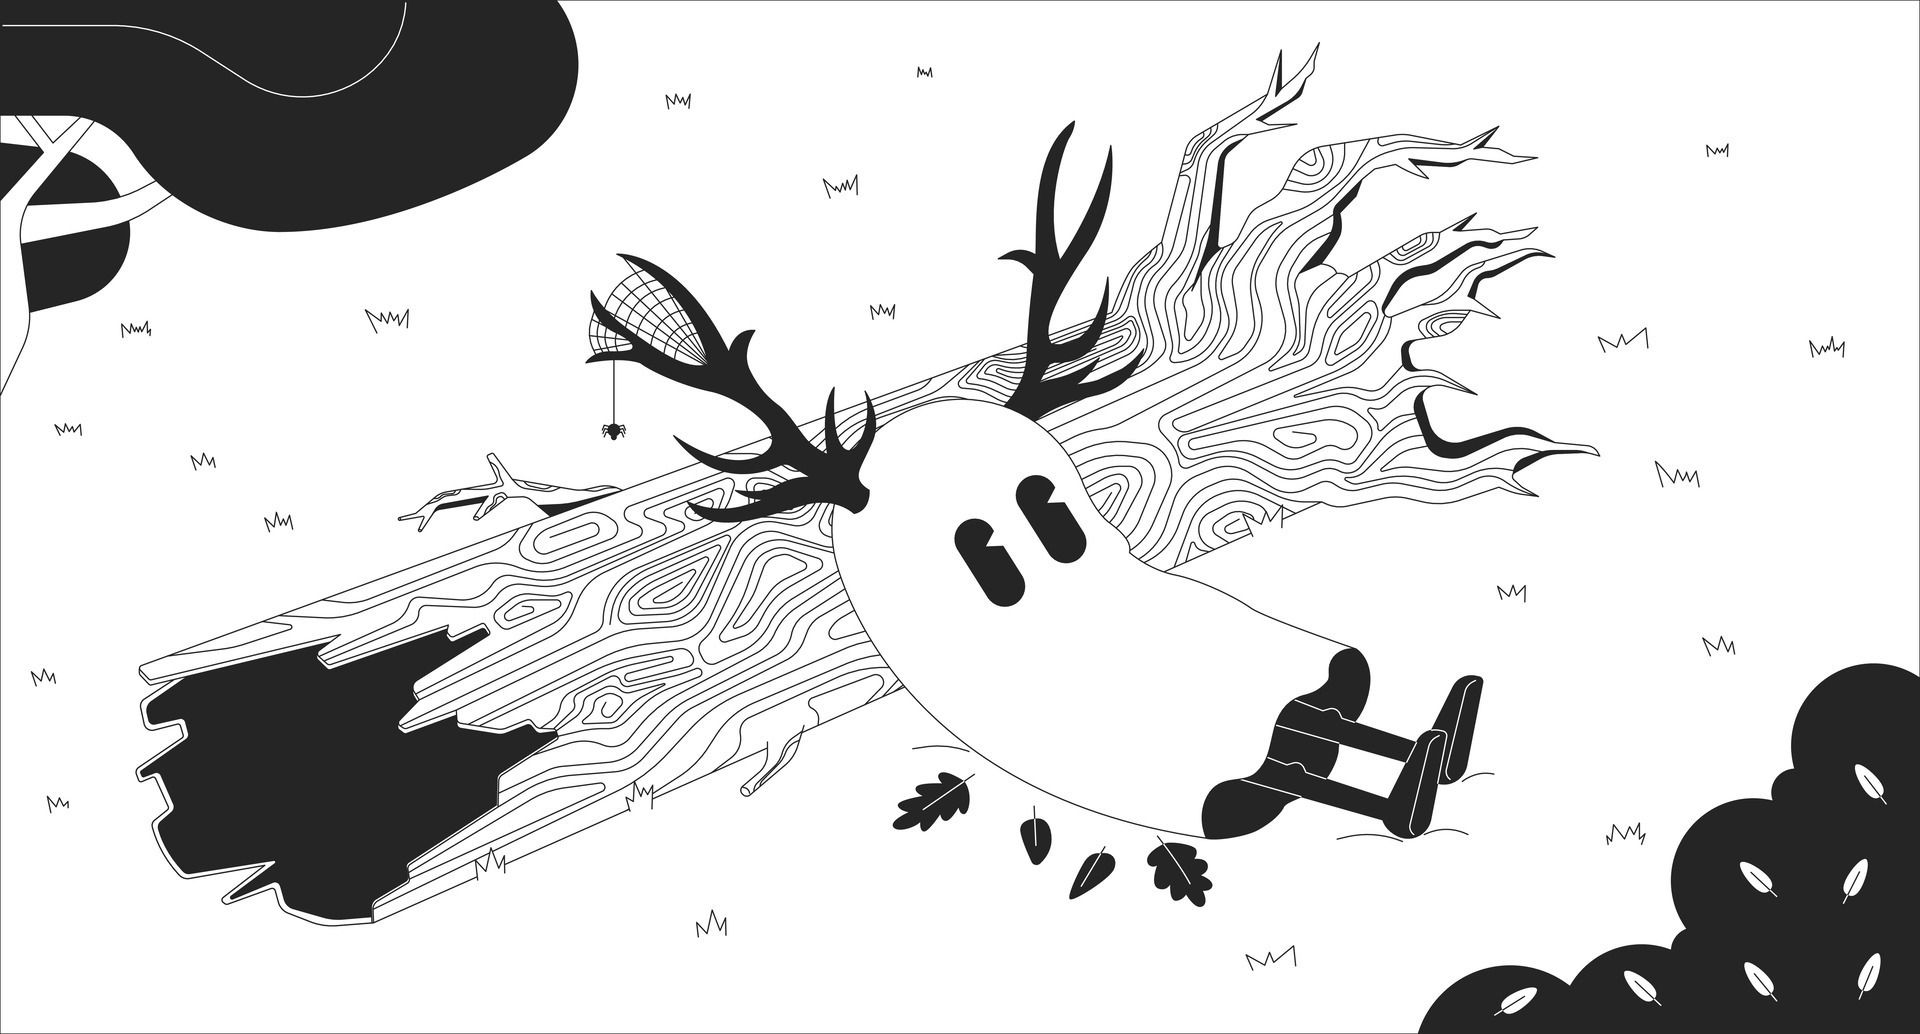 A black and white illustration of a person with antlers and a tail lying on a tree trunk. - Ghost